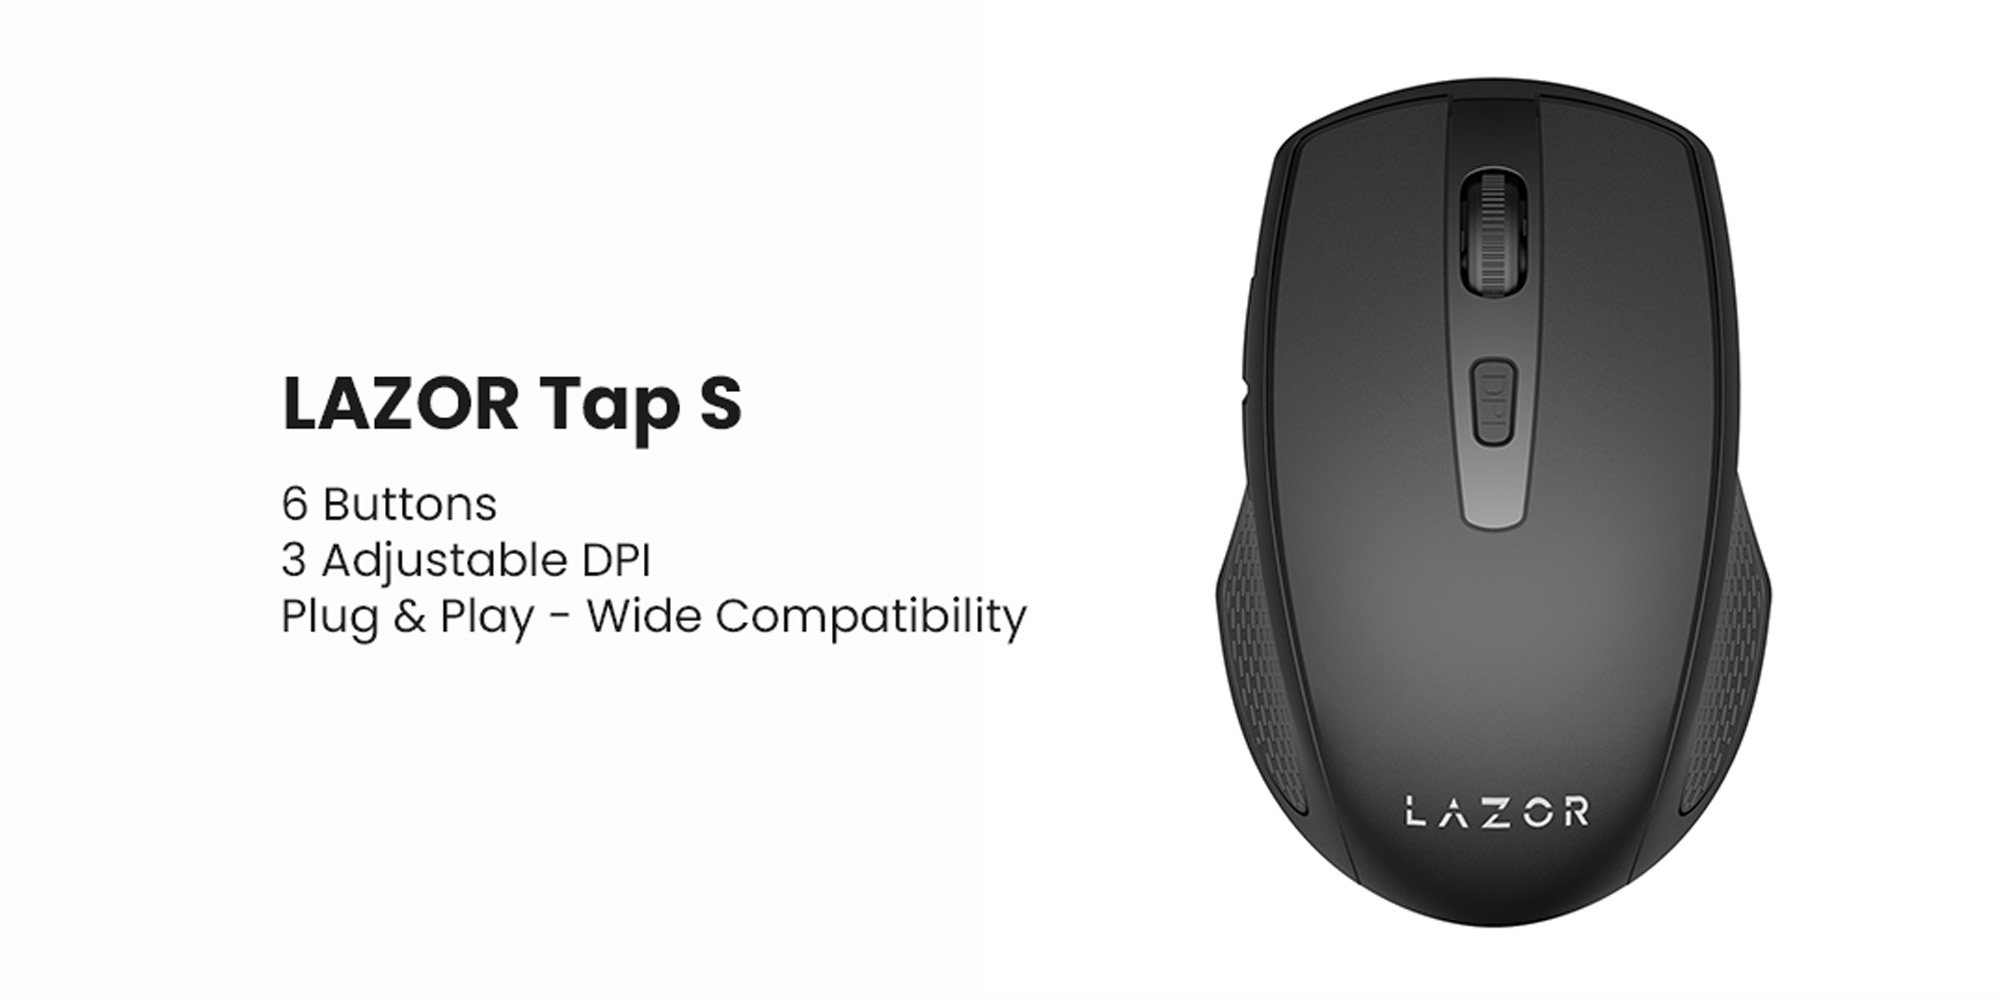 LAZOR Tap-S WM02C: Wireless Mouse, Ergonomic PC Mouse with USB Receiver, 3 DPI Adjustable (800-1200-1600), 6 Buttons, Up to 10M Wireless Connection, Ultra-Fast Scroll - Black